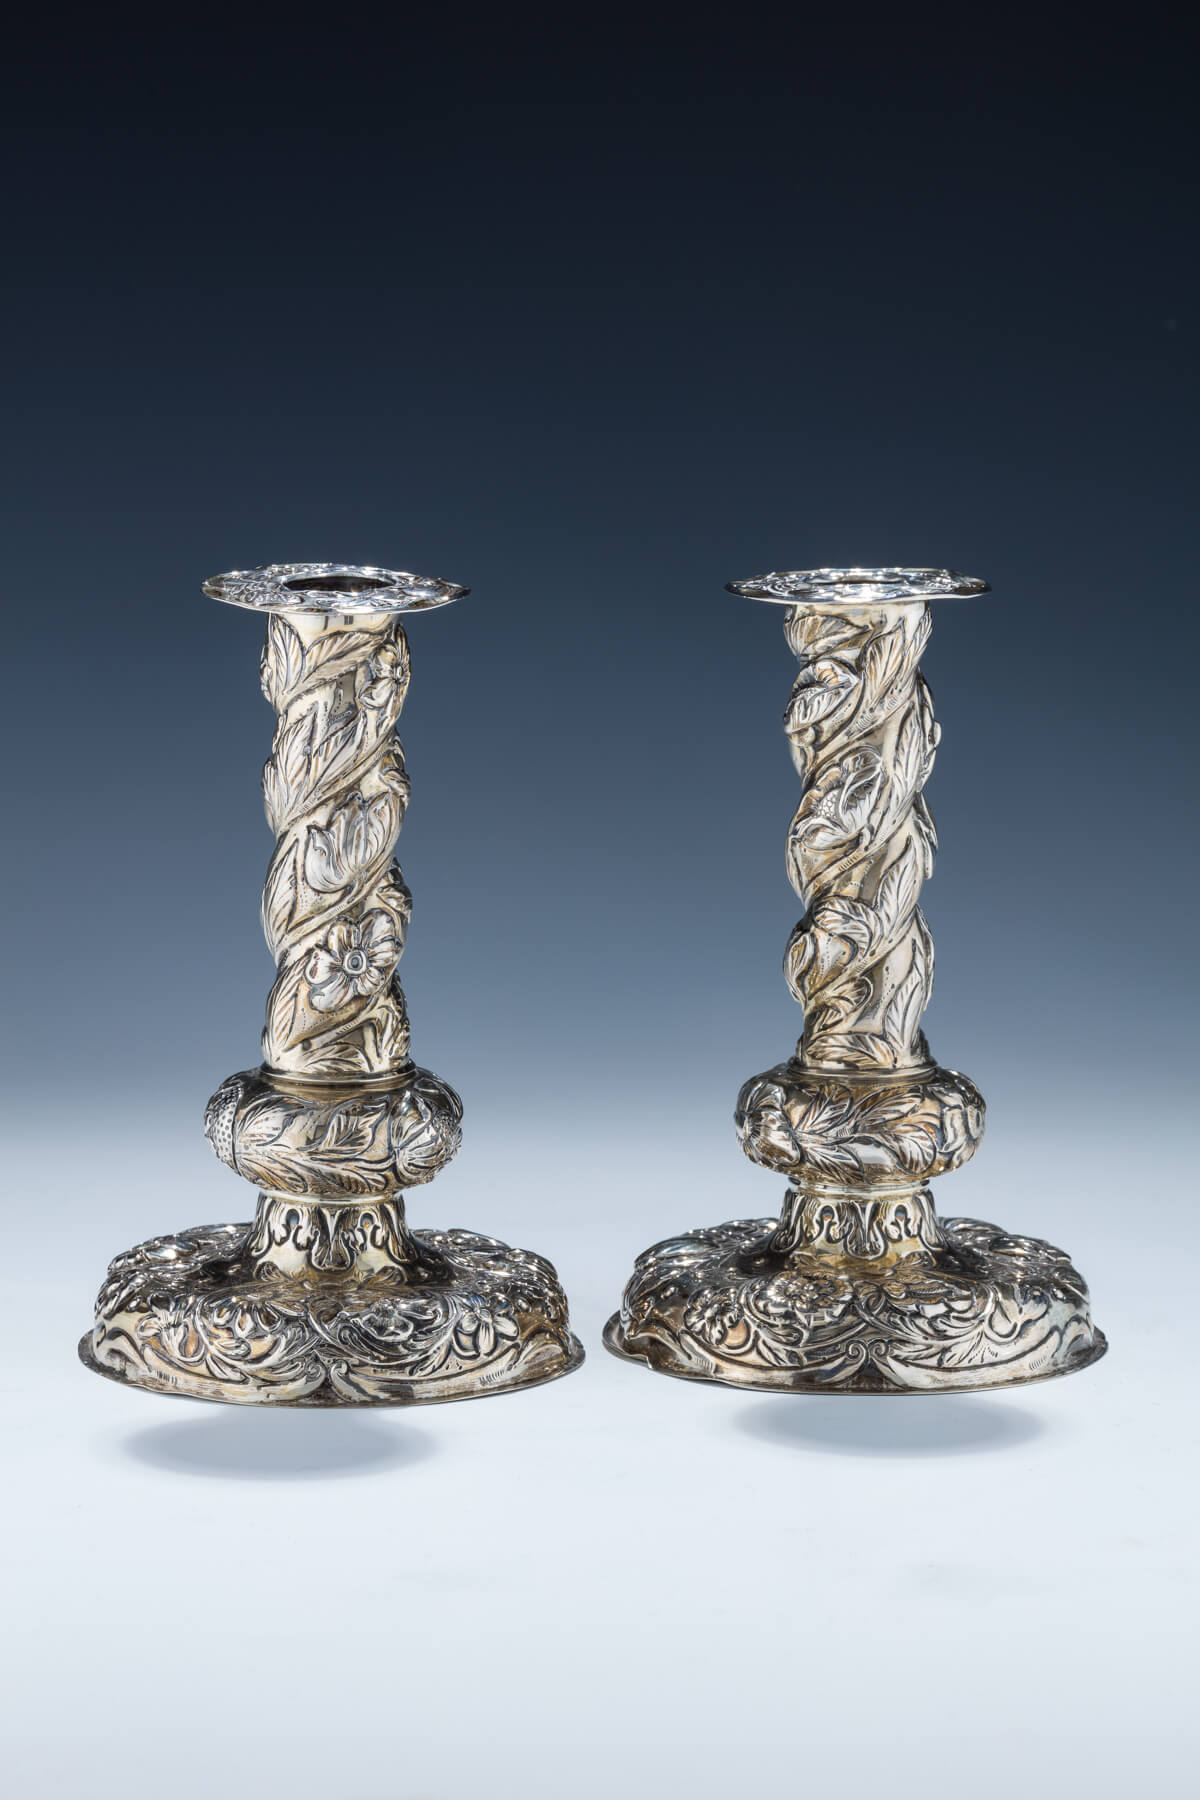 12. A Pair of Silver Candlesticks